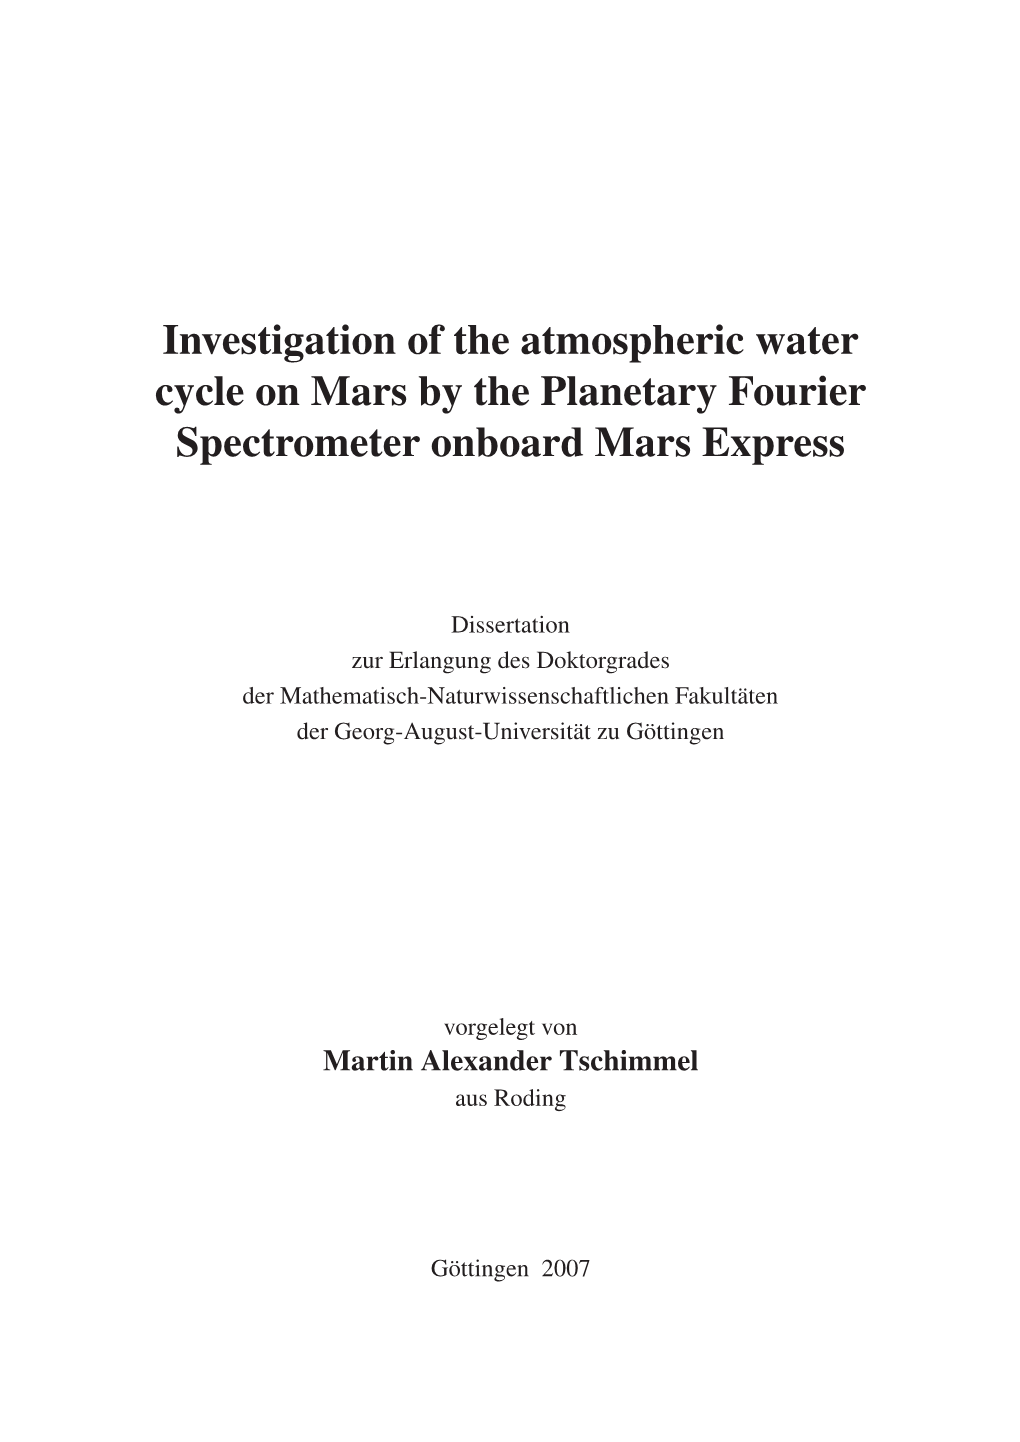 Investigation of the Atmospheric Water Cycle on Mars by the Planetary Fourier Spectrometer Onboard Mars Express